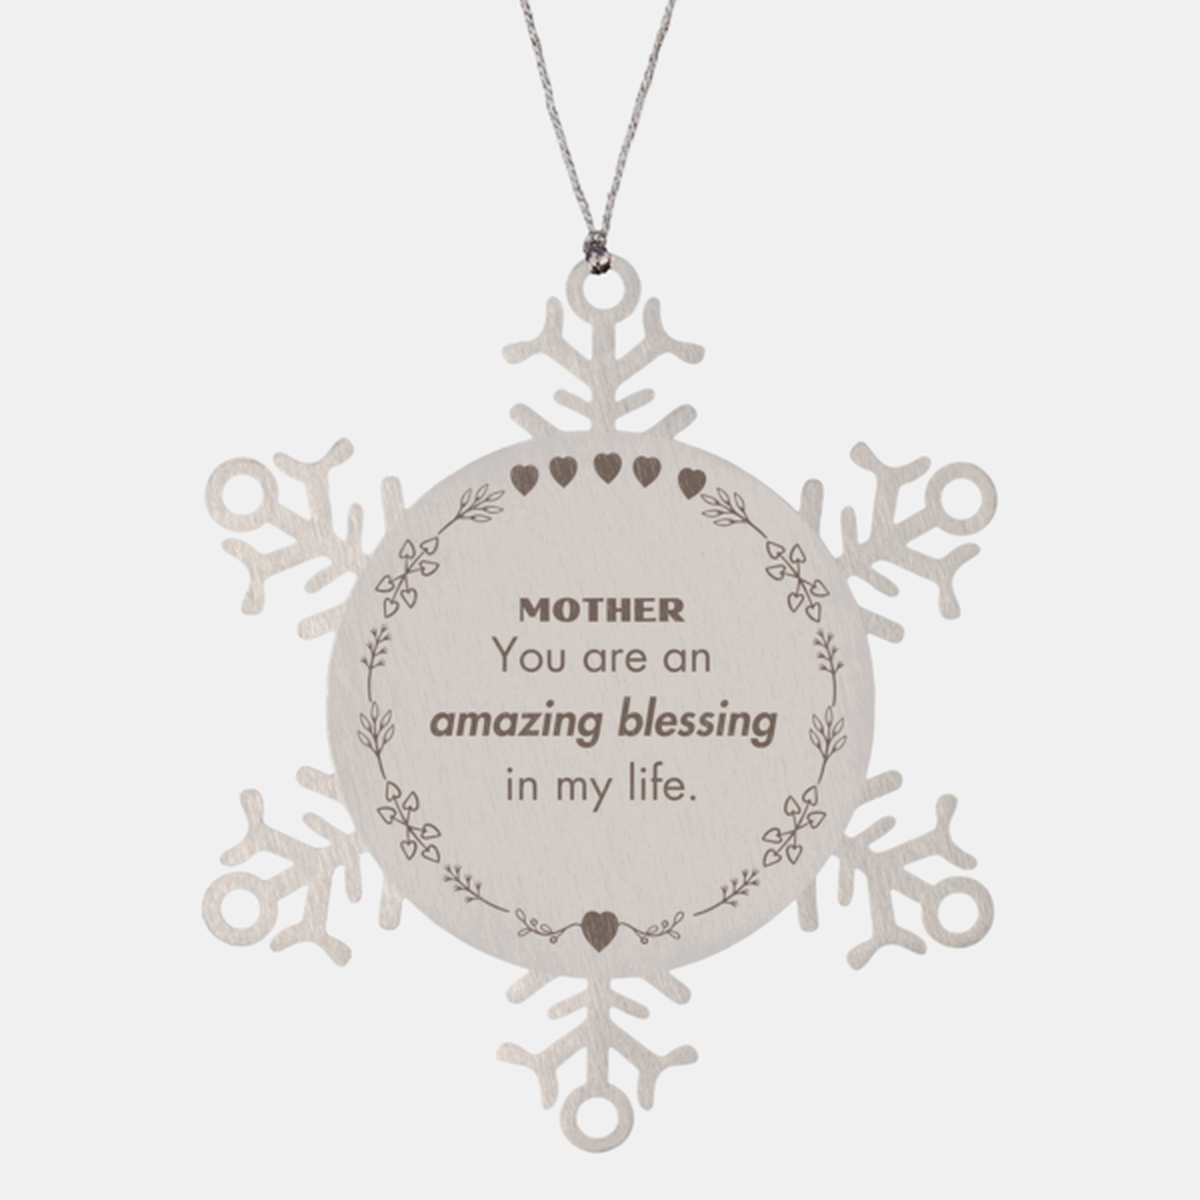 Mother Snowflake Ornament, You are an amazing blessing in my life, Thank You Gifts For Mother, Inspirational Birthday Christmas Unique Gifts For Mother